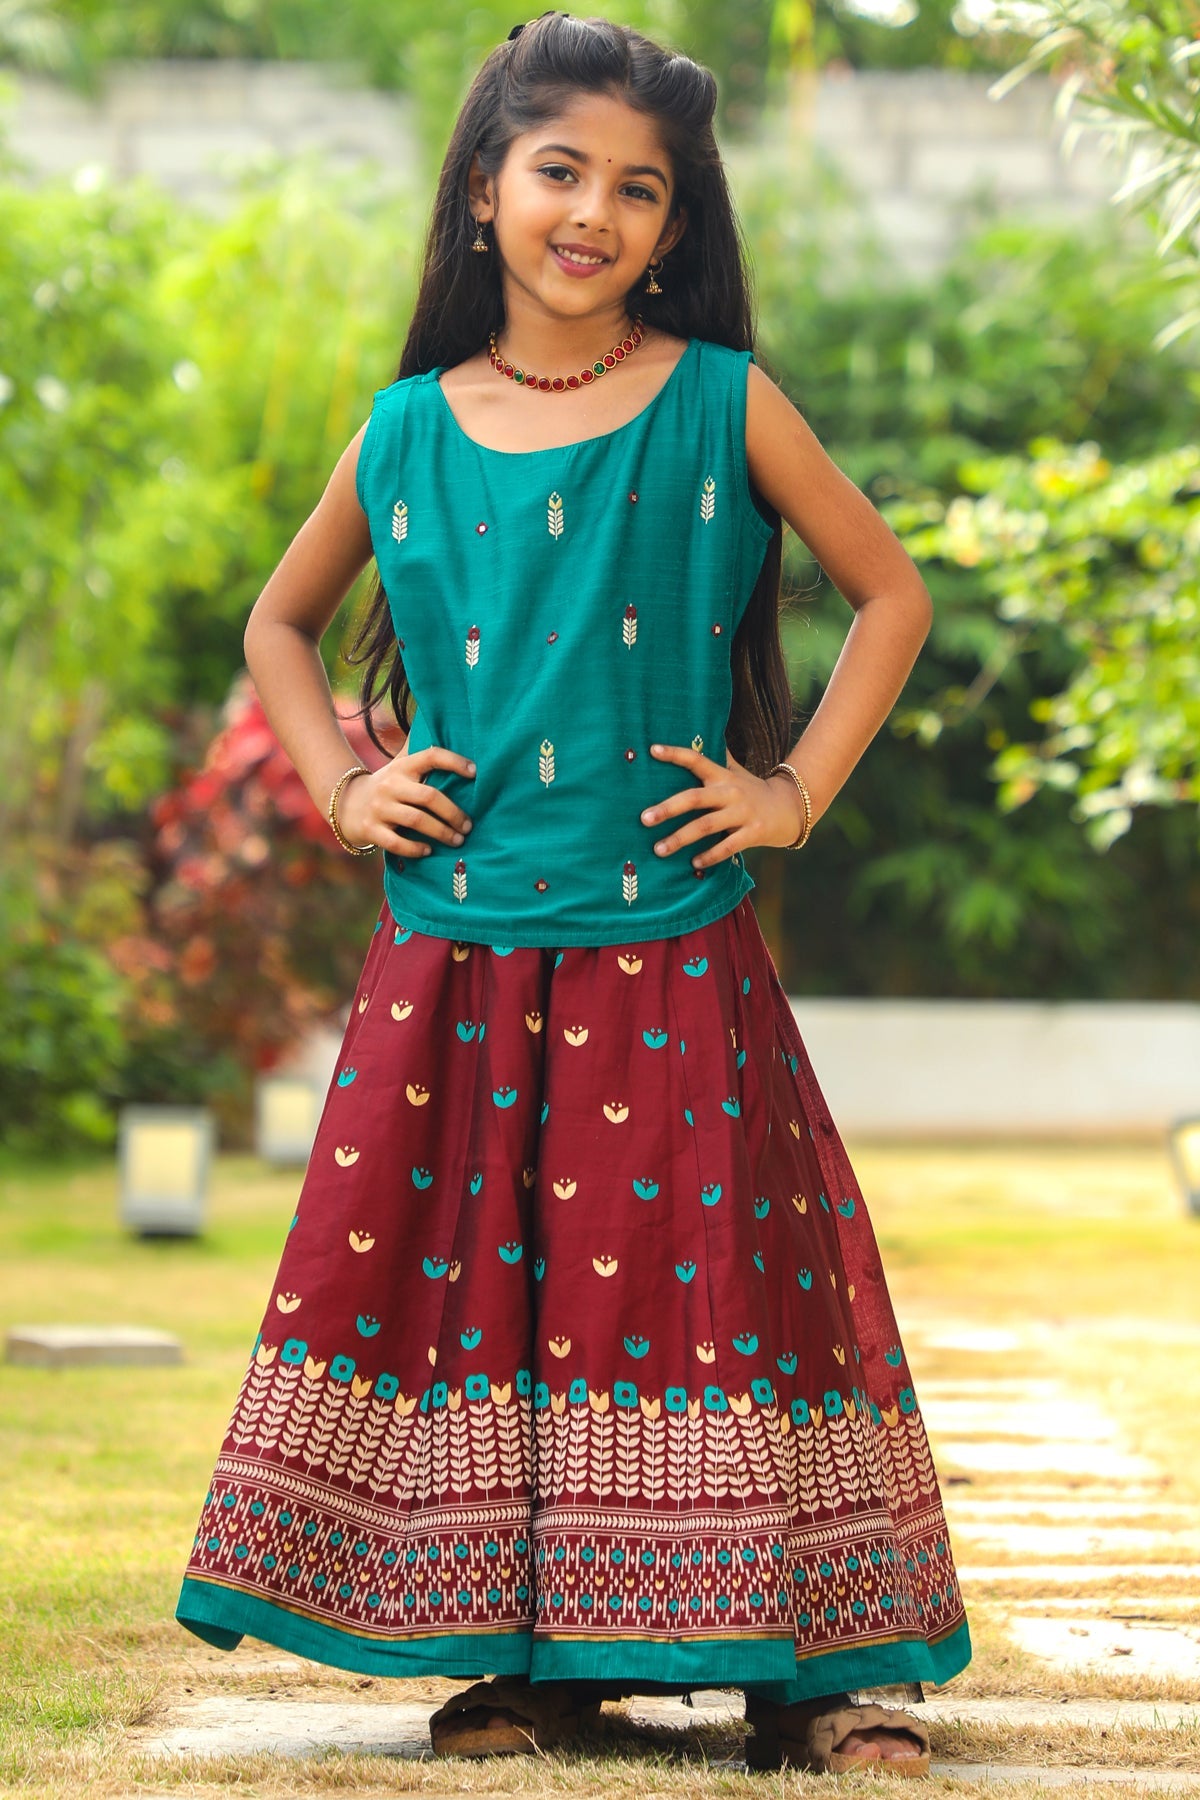 Floral Motif Embroidered Top All Over Geometric Printed Skirt Set Green Maroon